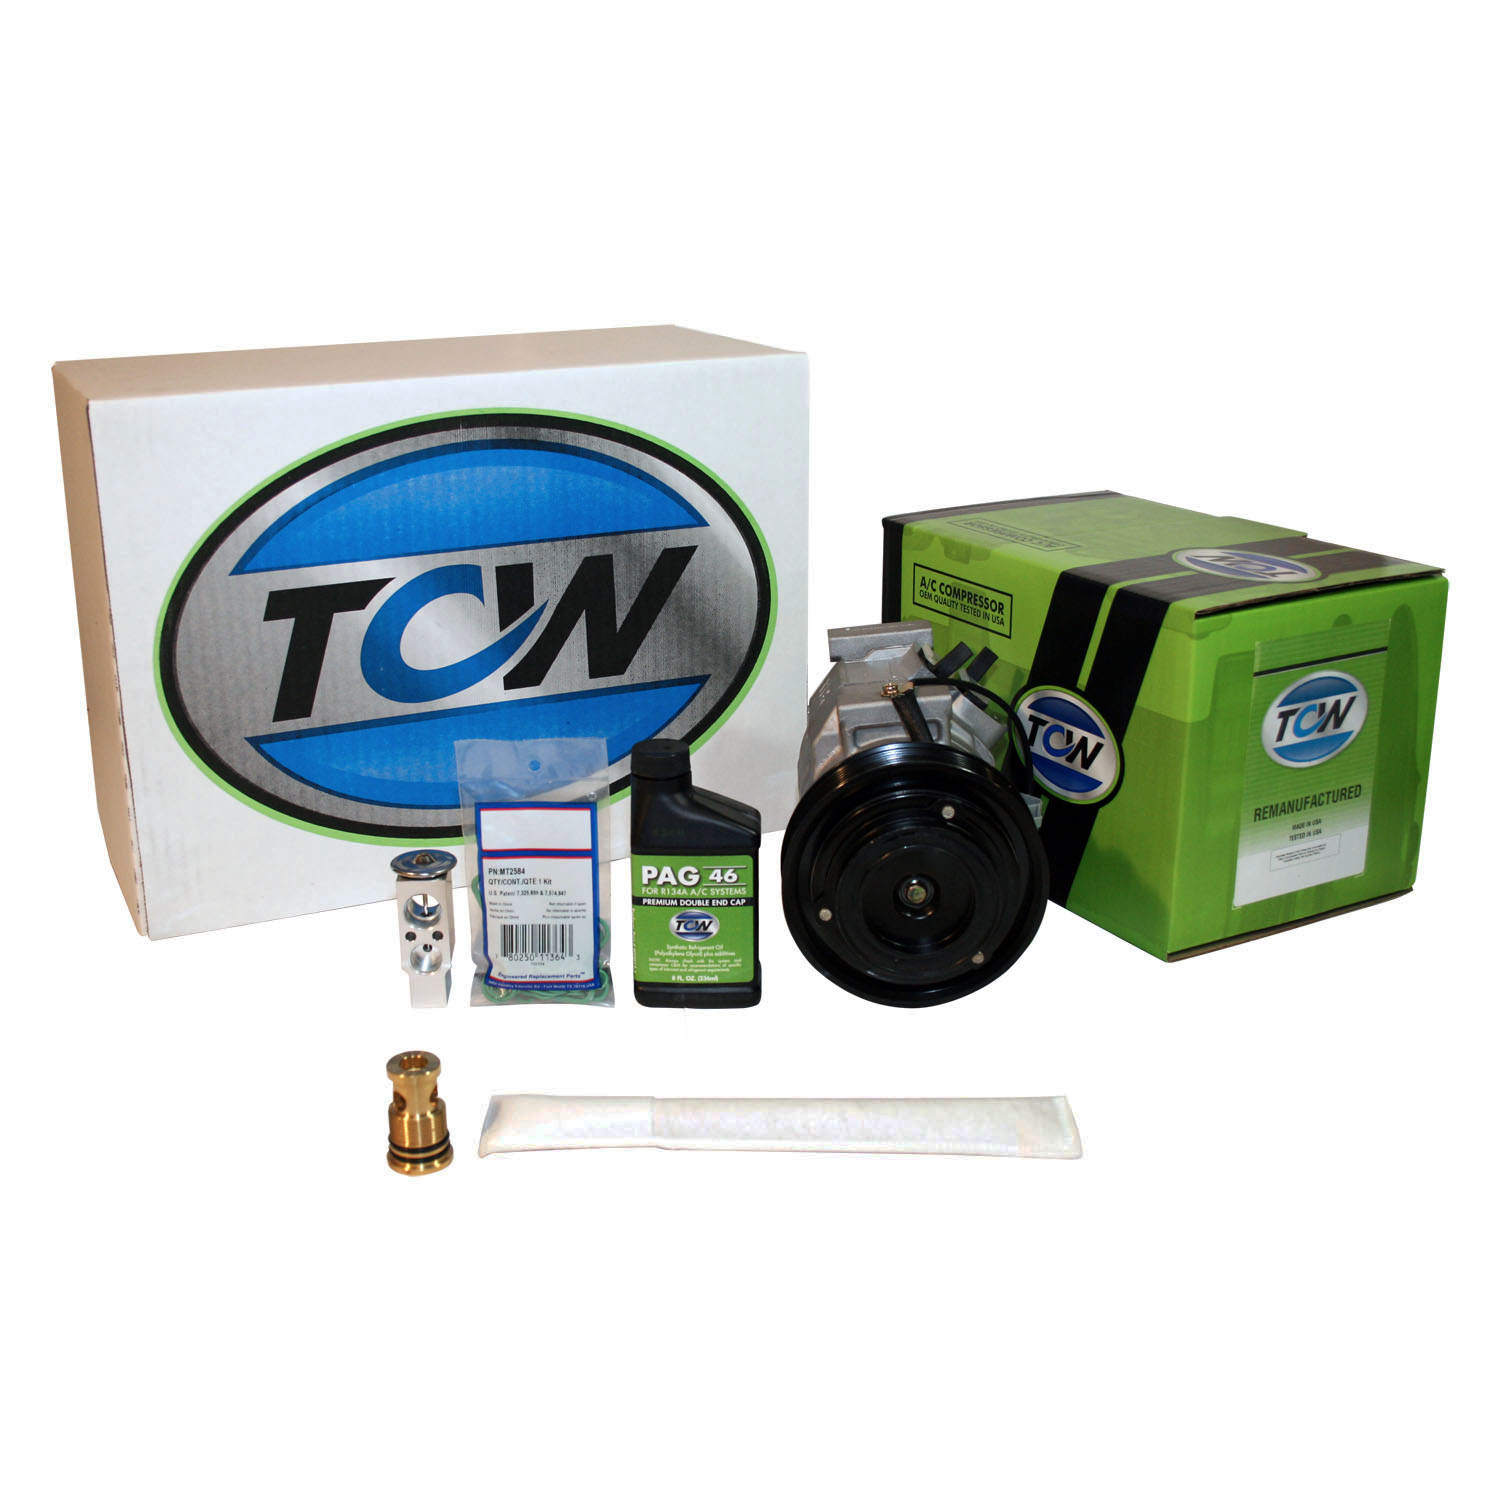 TCW Vehicle A/C Kit K1000388R Remanufactured Product Image field_60b6a13a6e67c